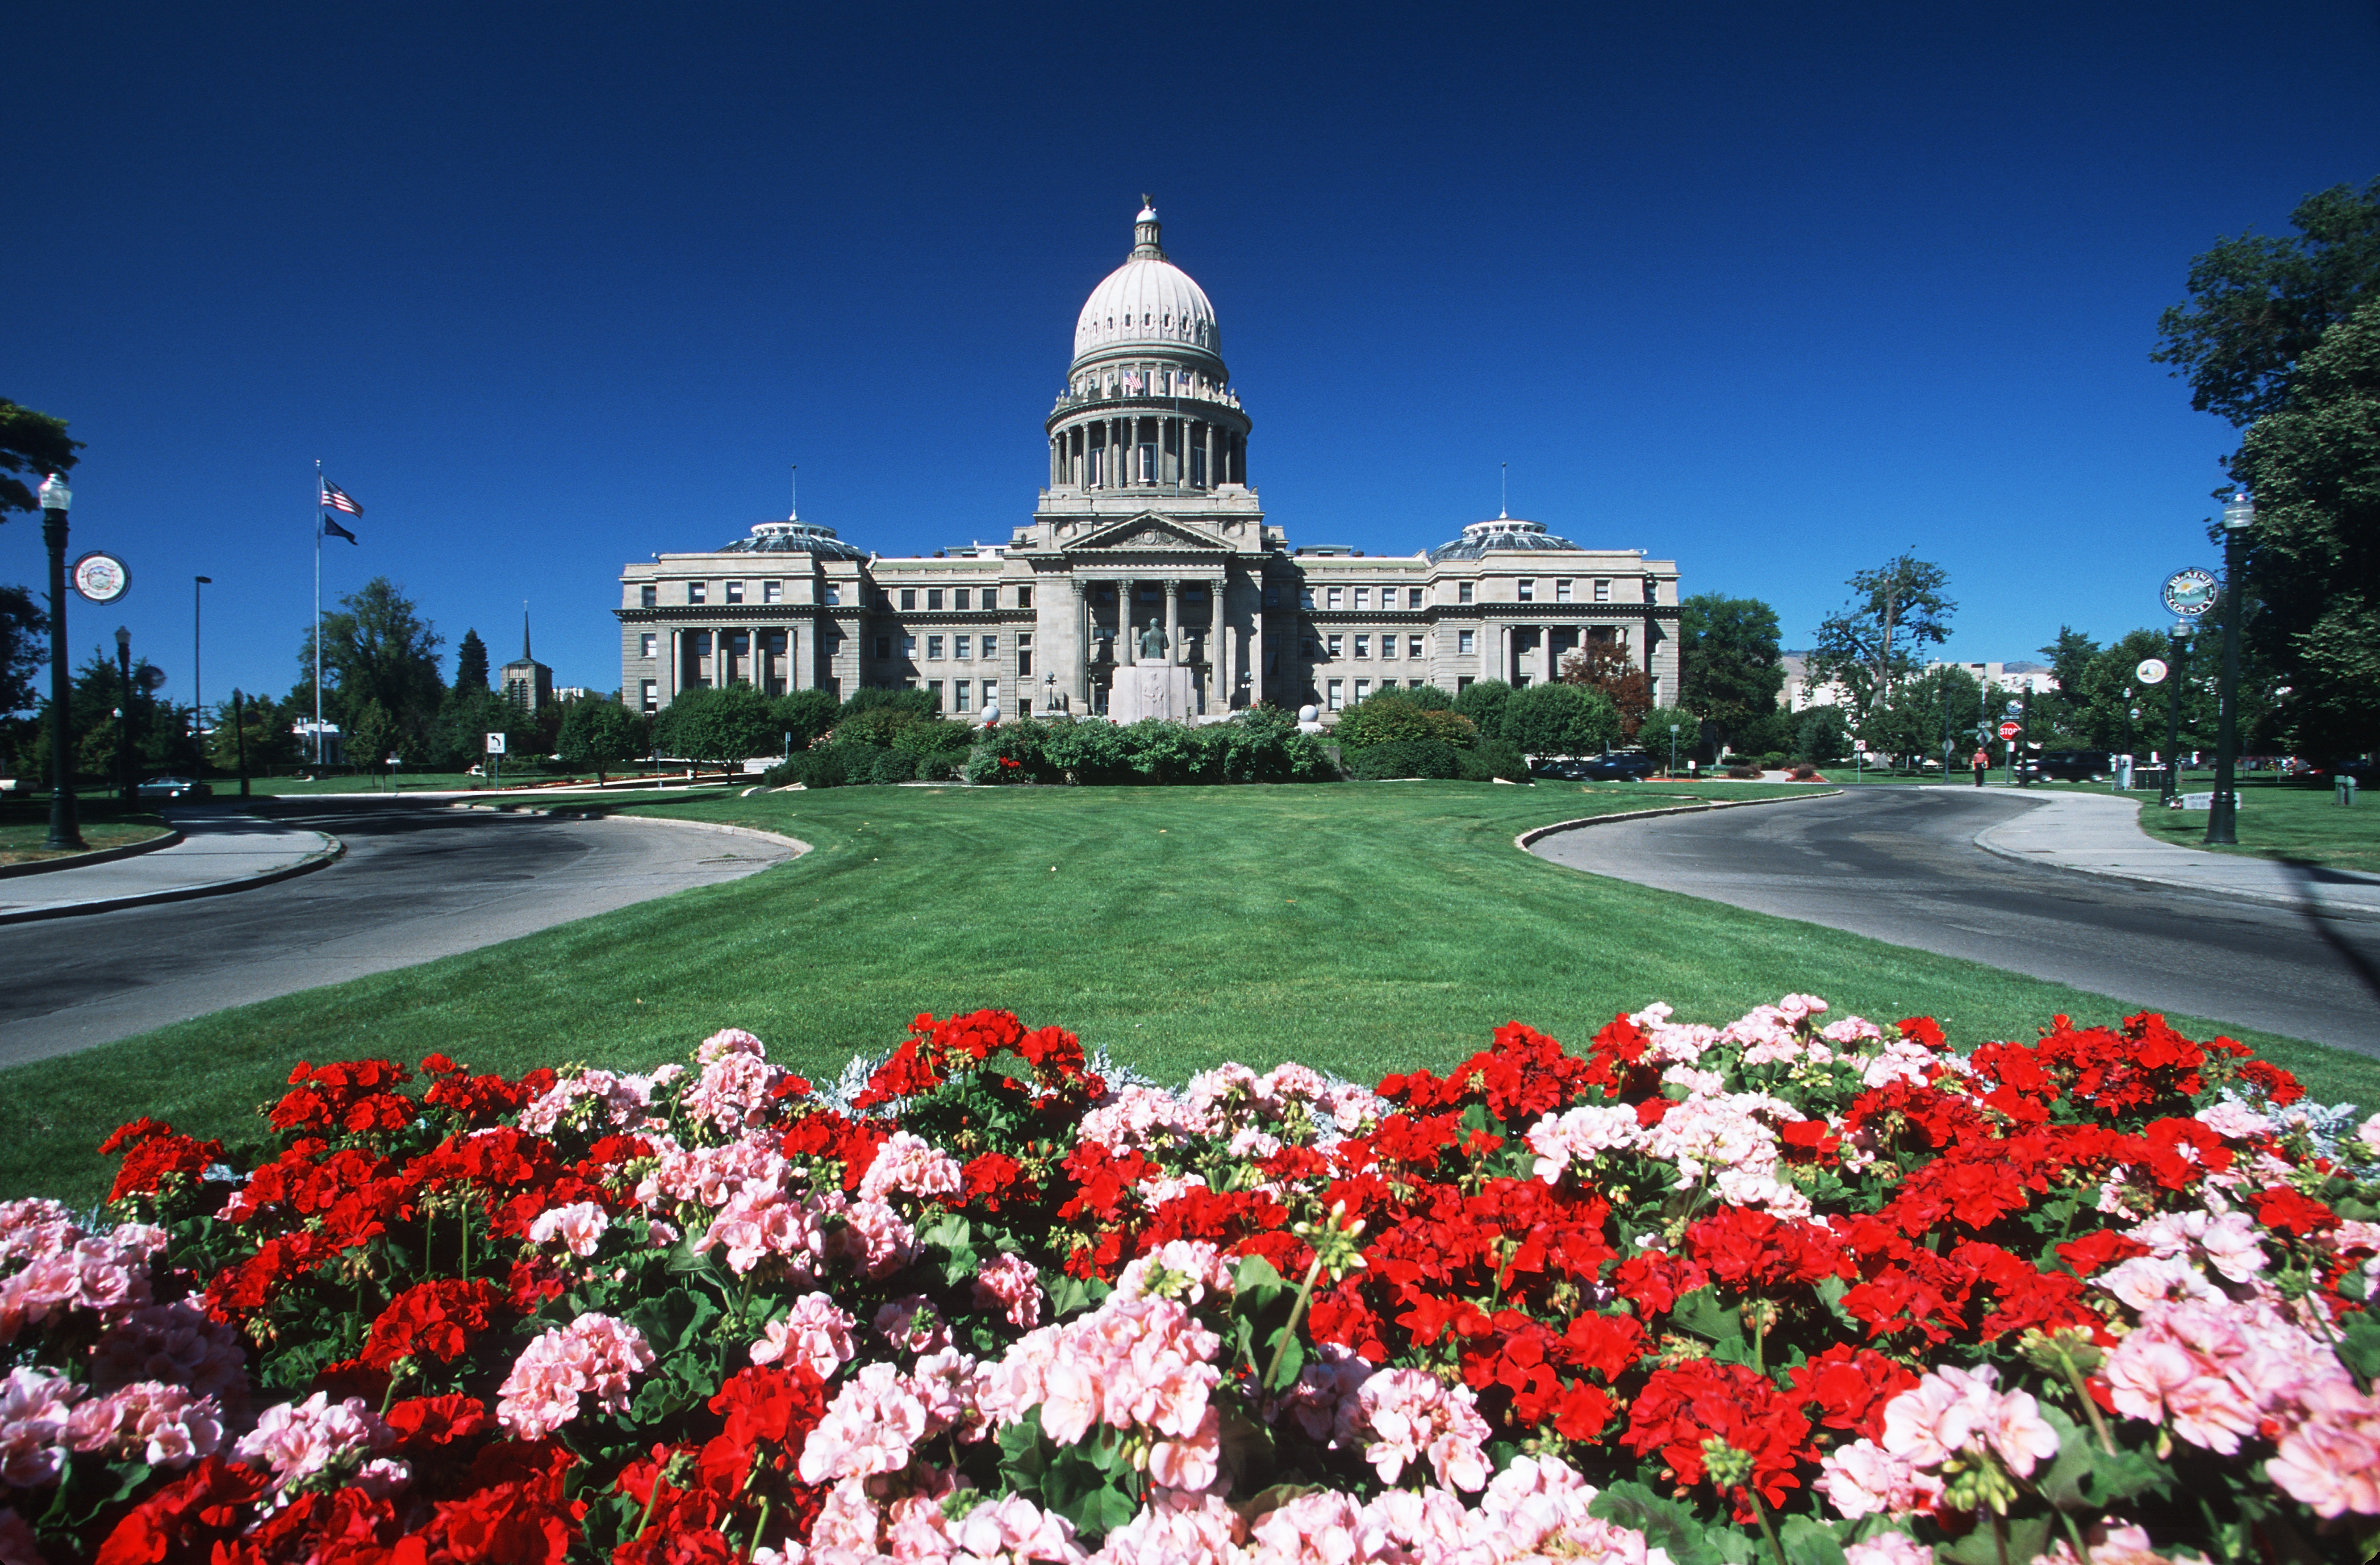 The State Capitol of Idaho, site of an insurgency targeting Obamacare.